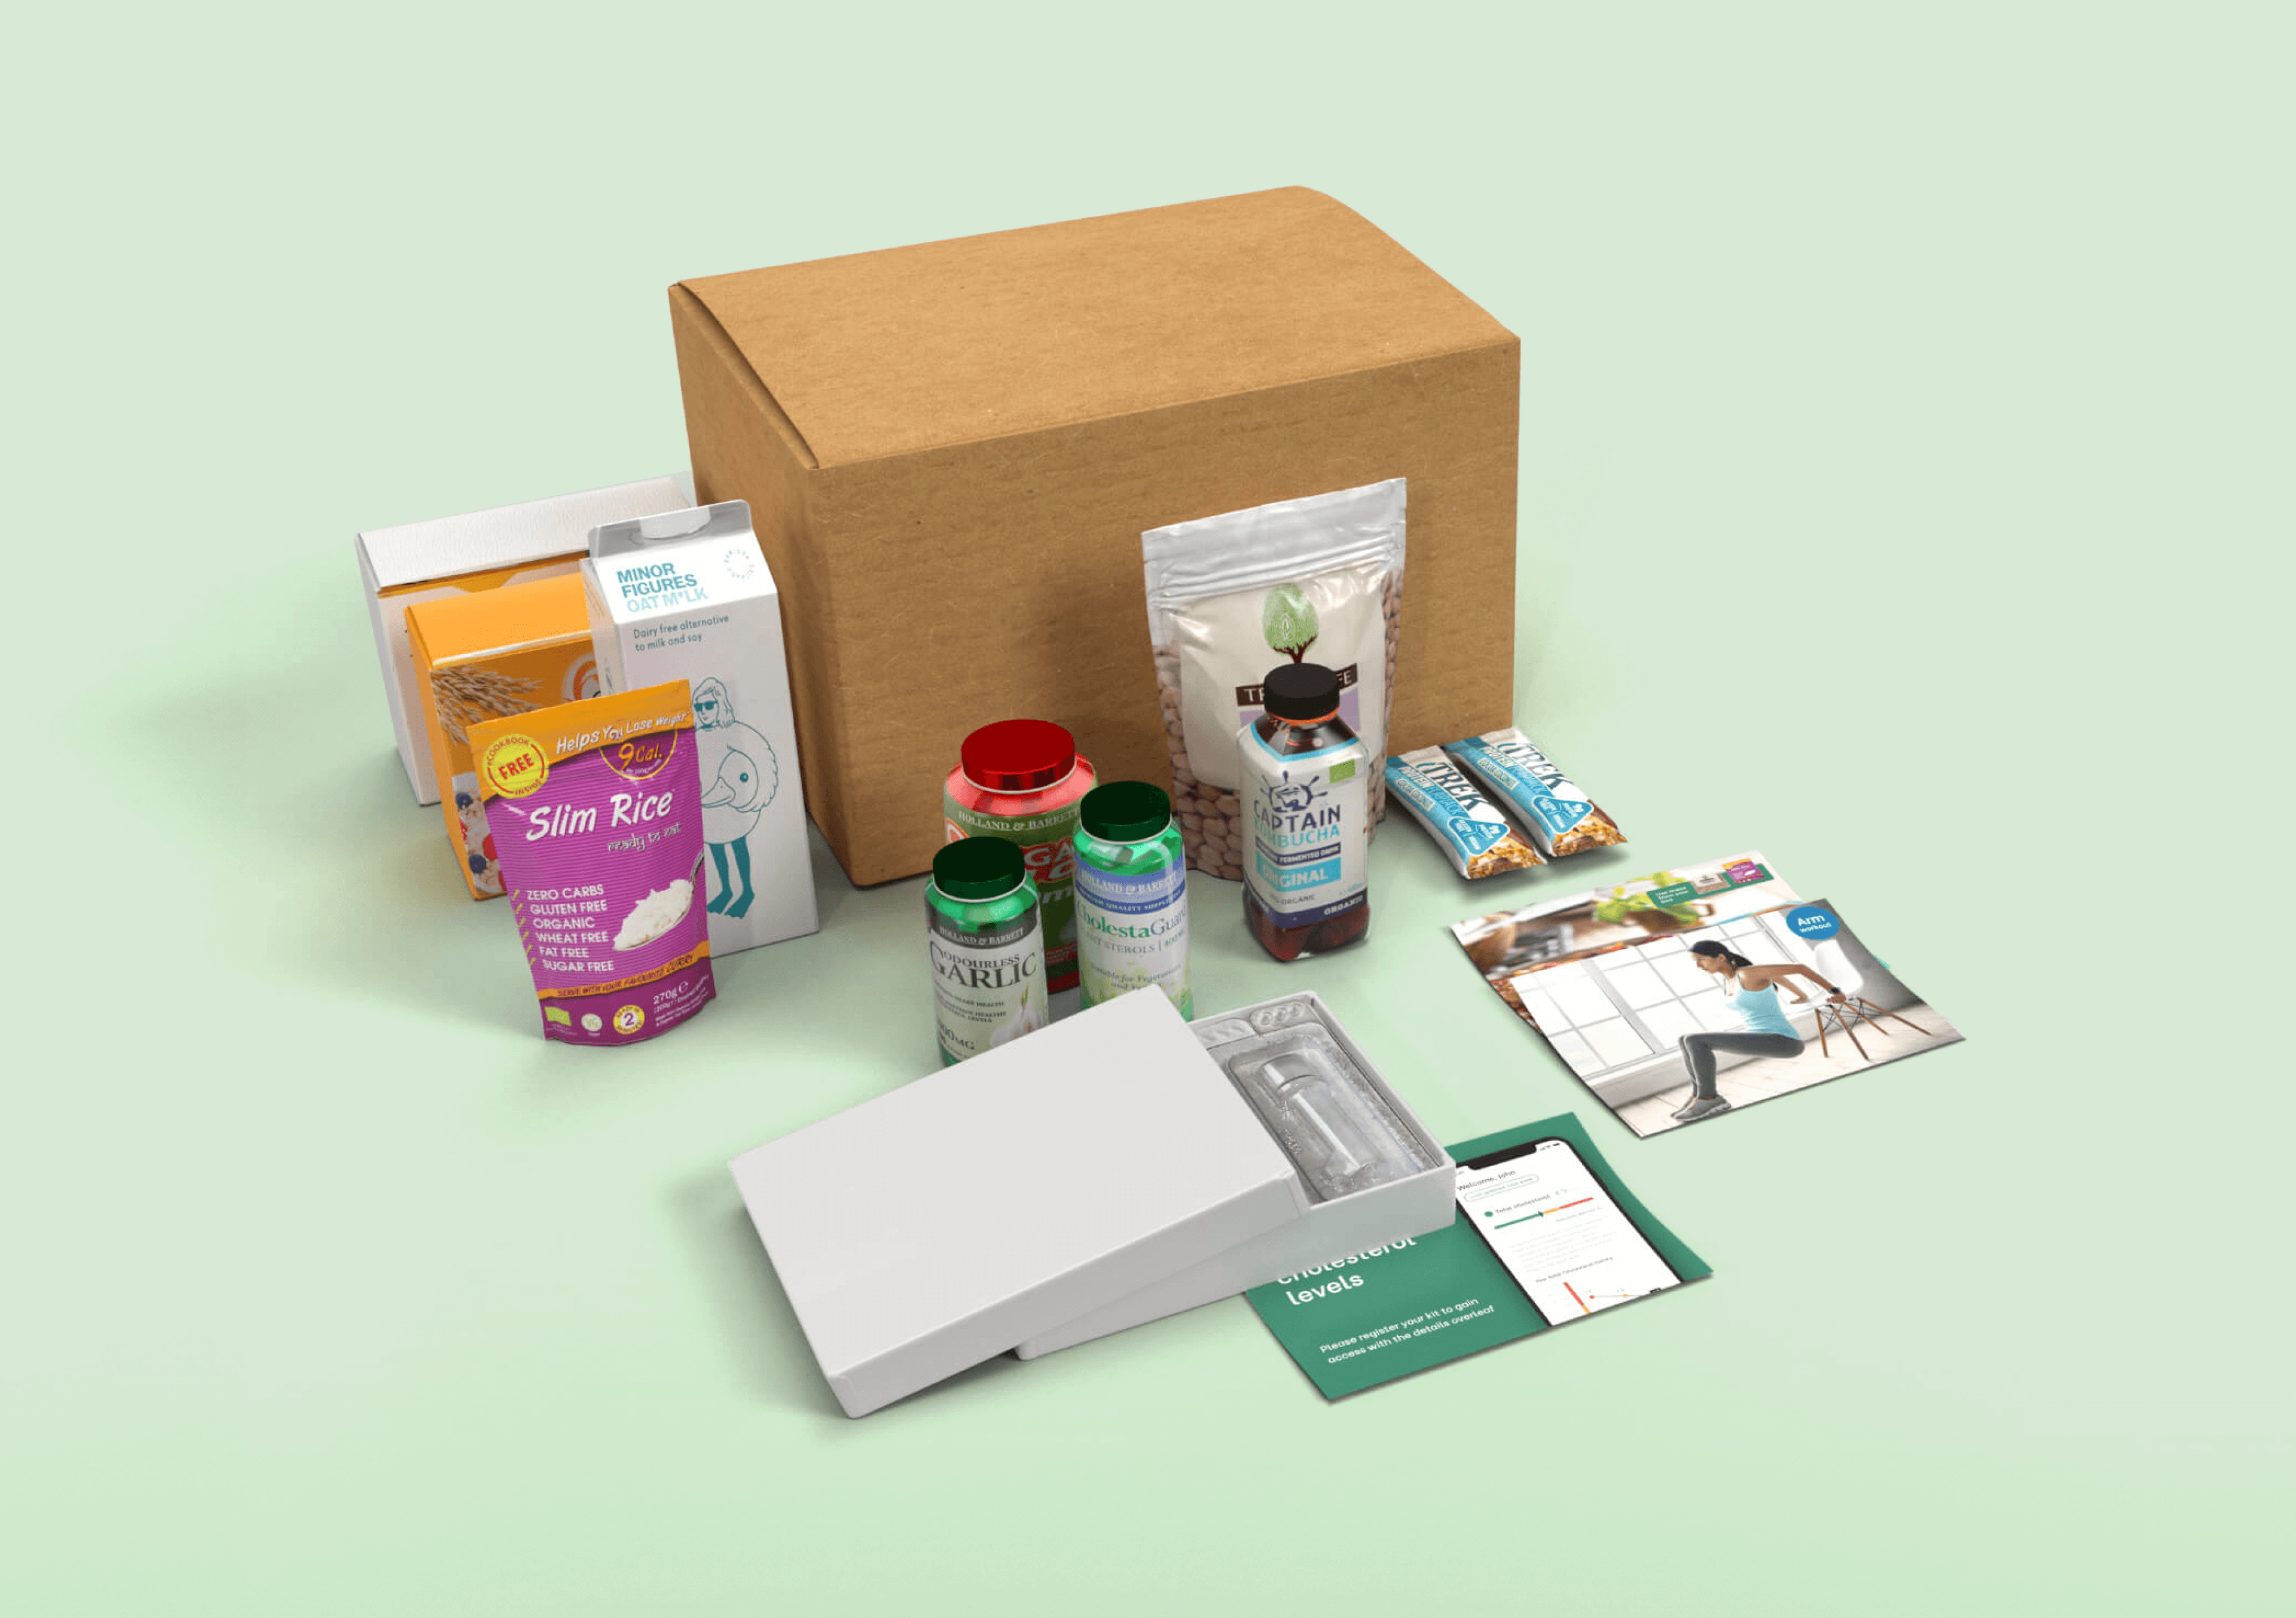 An image showing the contents of the cholesterol testing kit